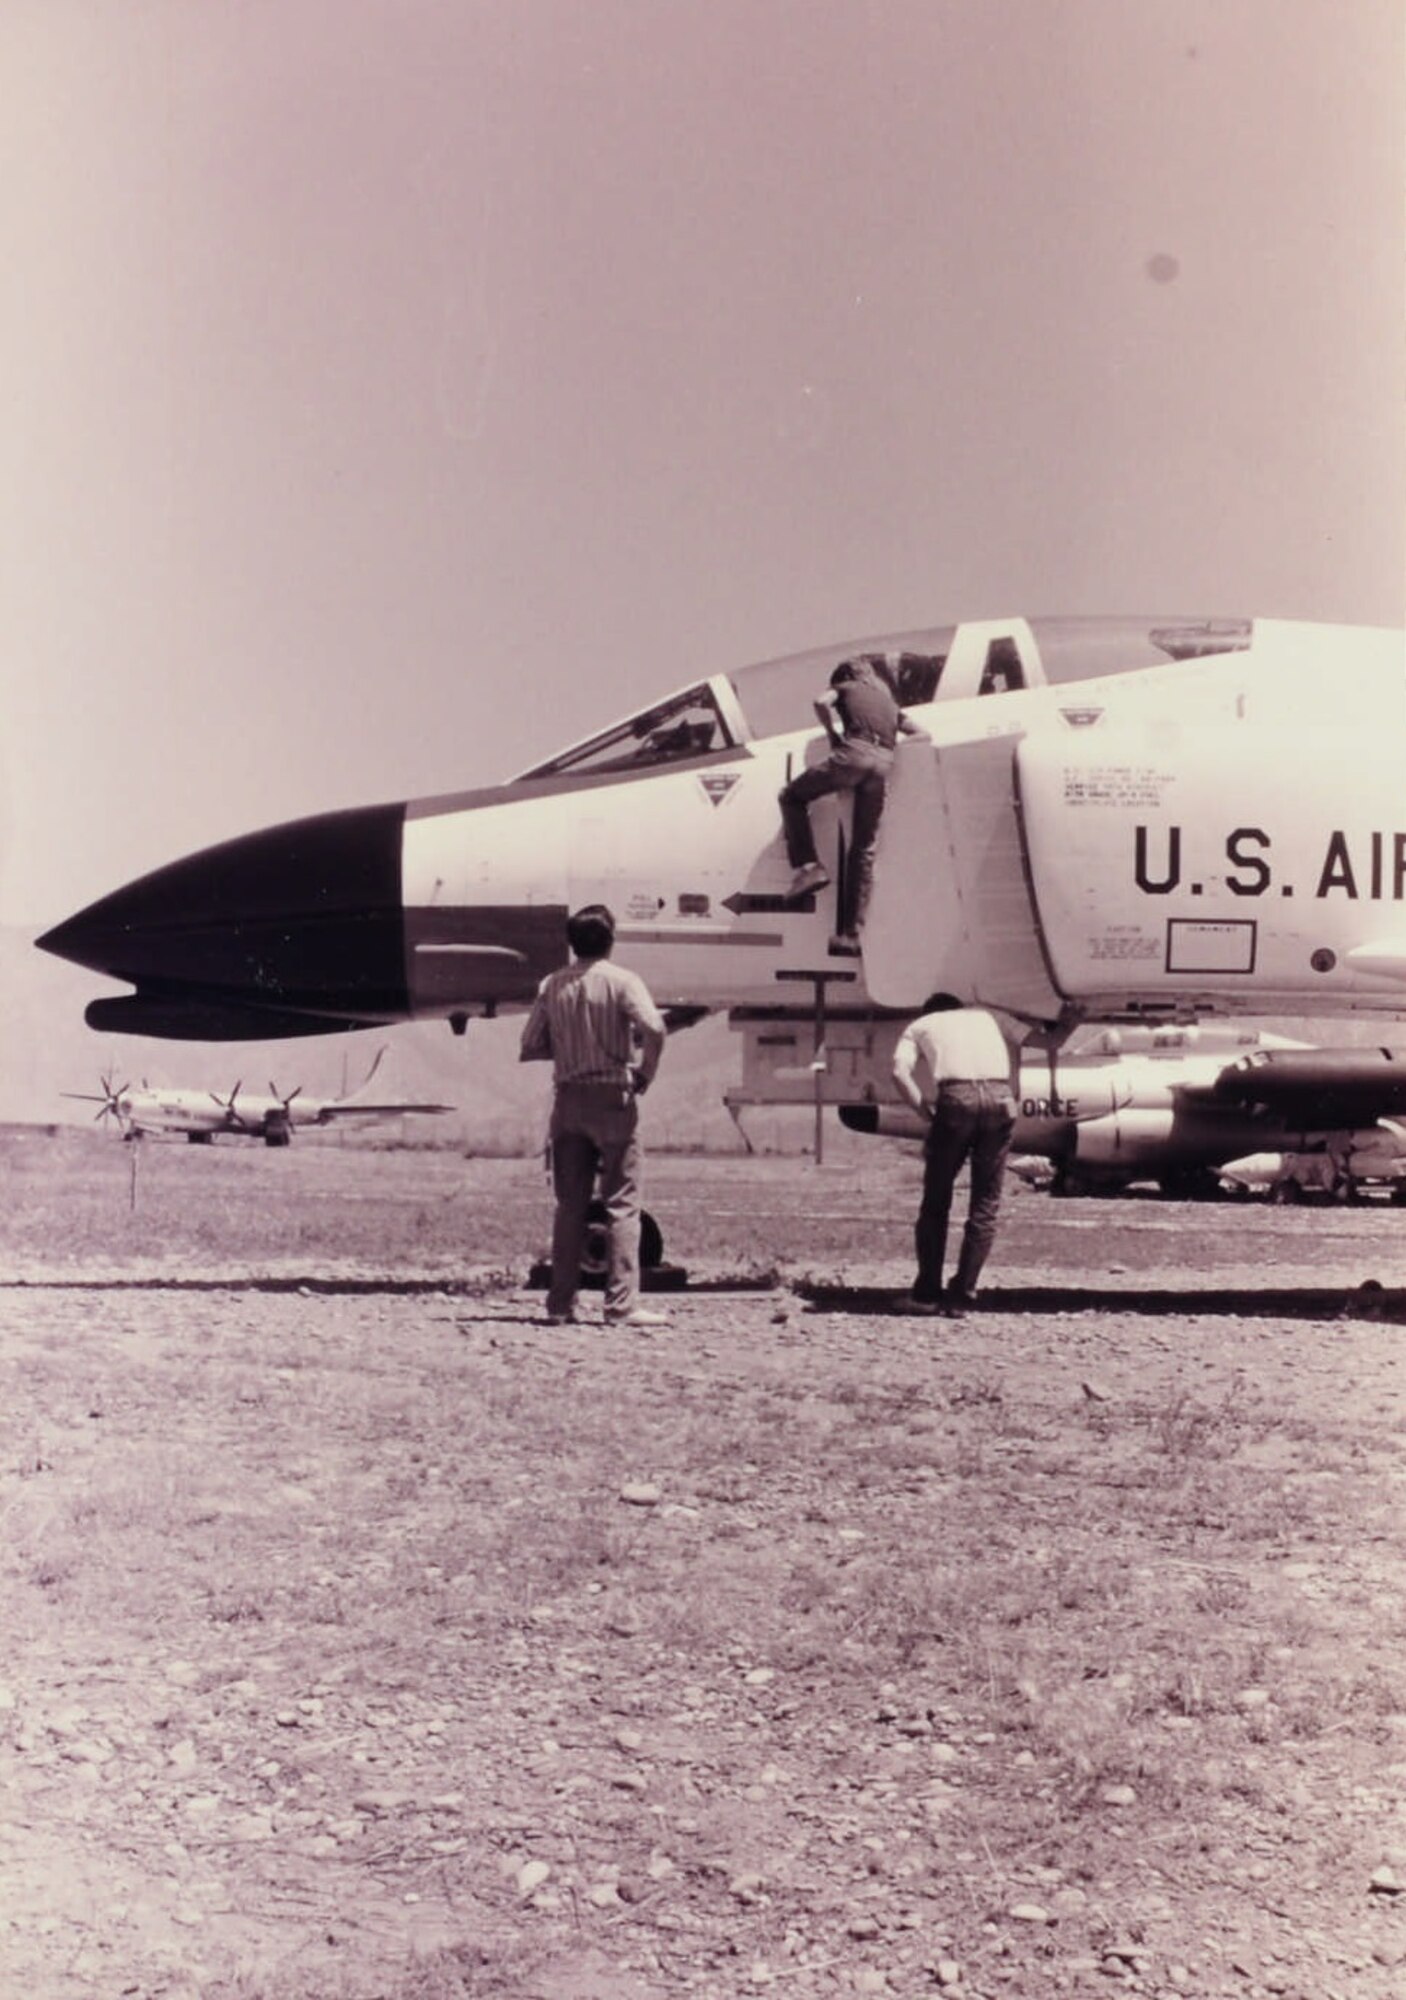 One can see in this photograph of a McDonnell Douglas F-4 Phantom II exhibit that the distance between some of the aircraft in Hill AFB’s air park was quite large during the late 1980s, which likely resulted in decreased visitation during the height of summer and winter seasons.